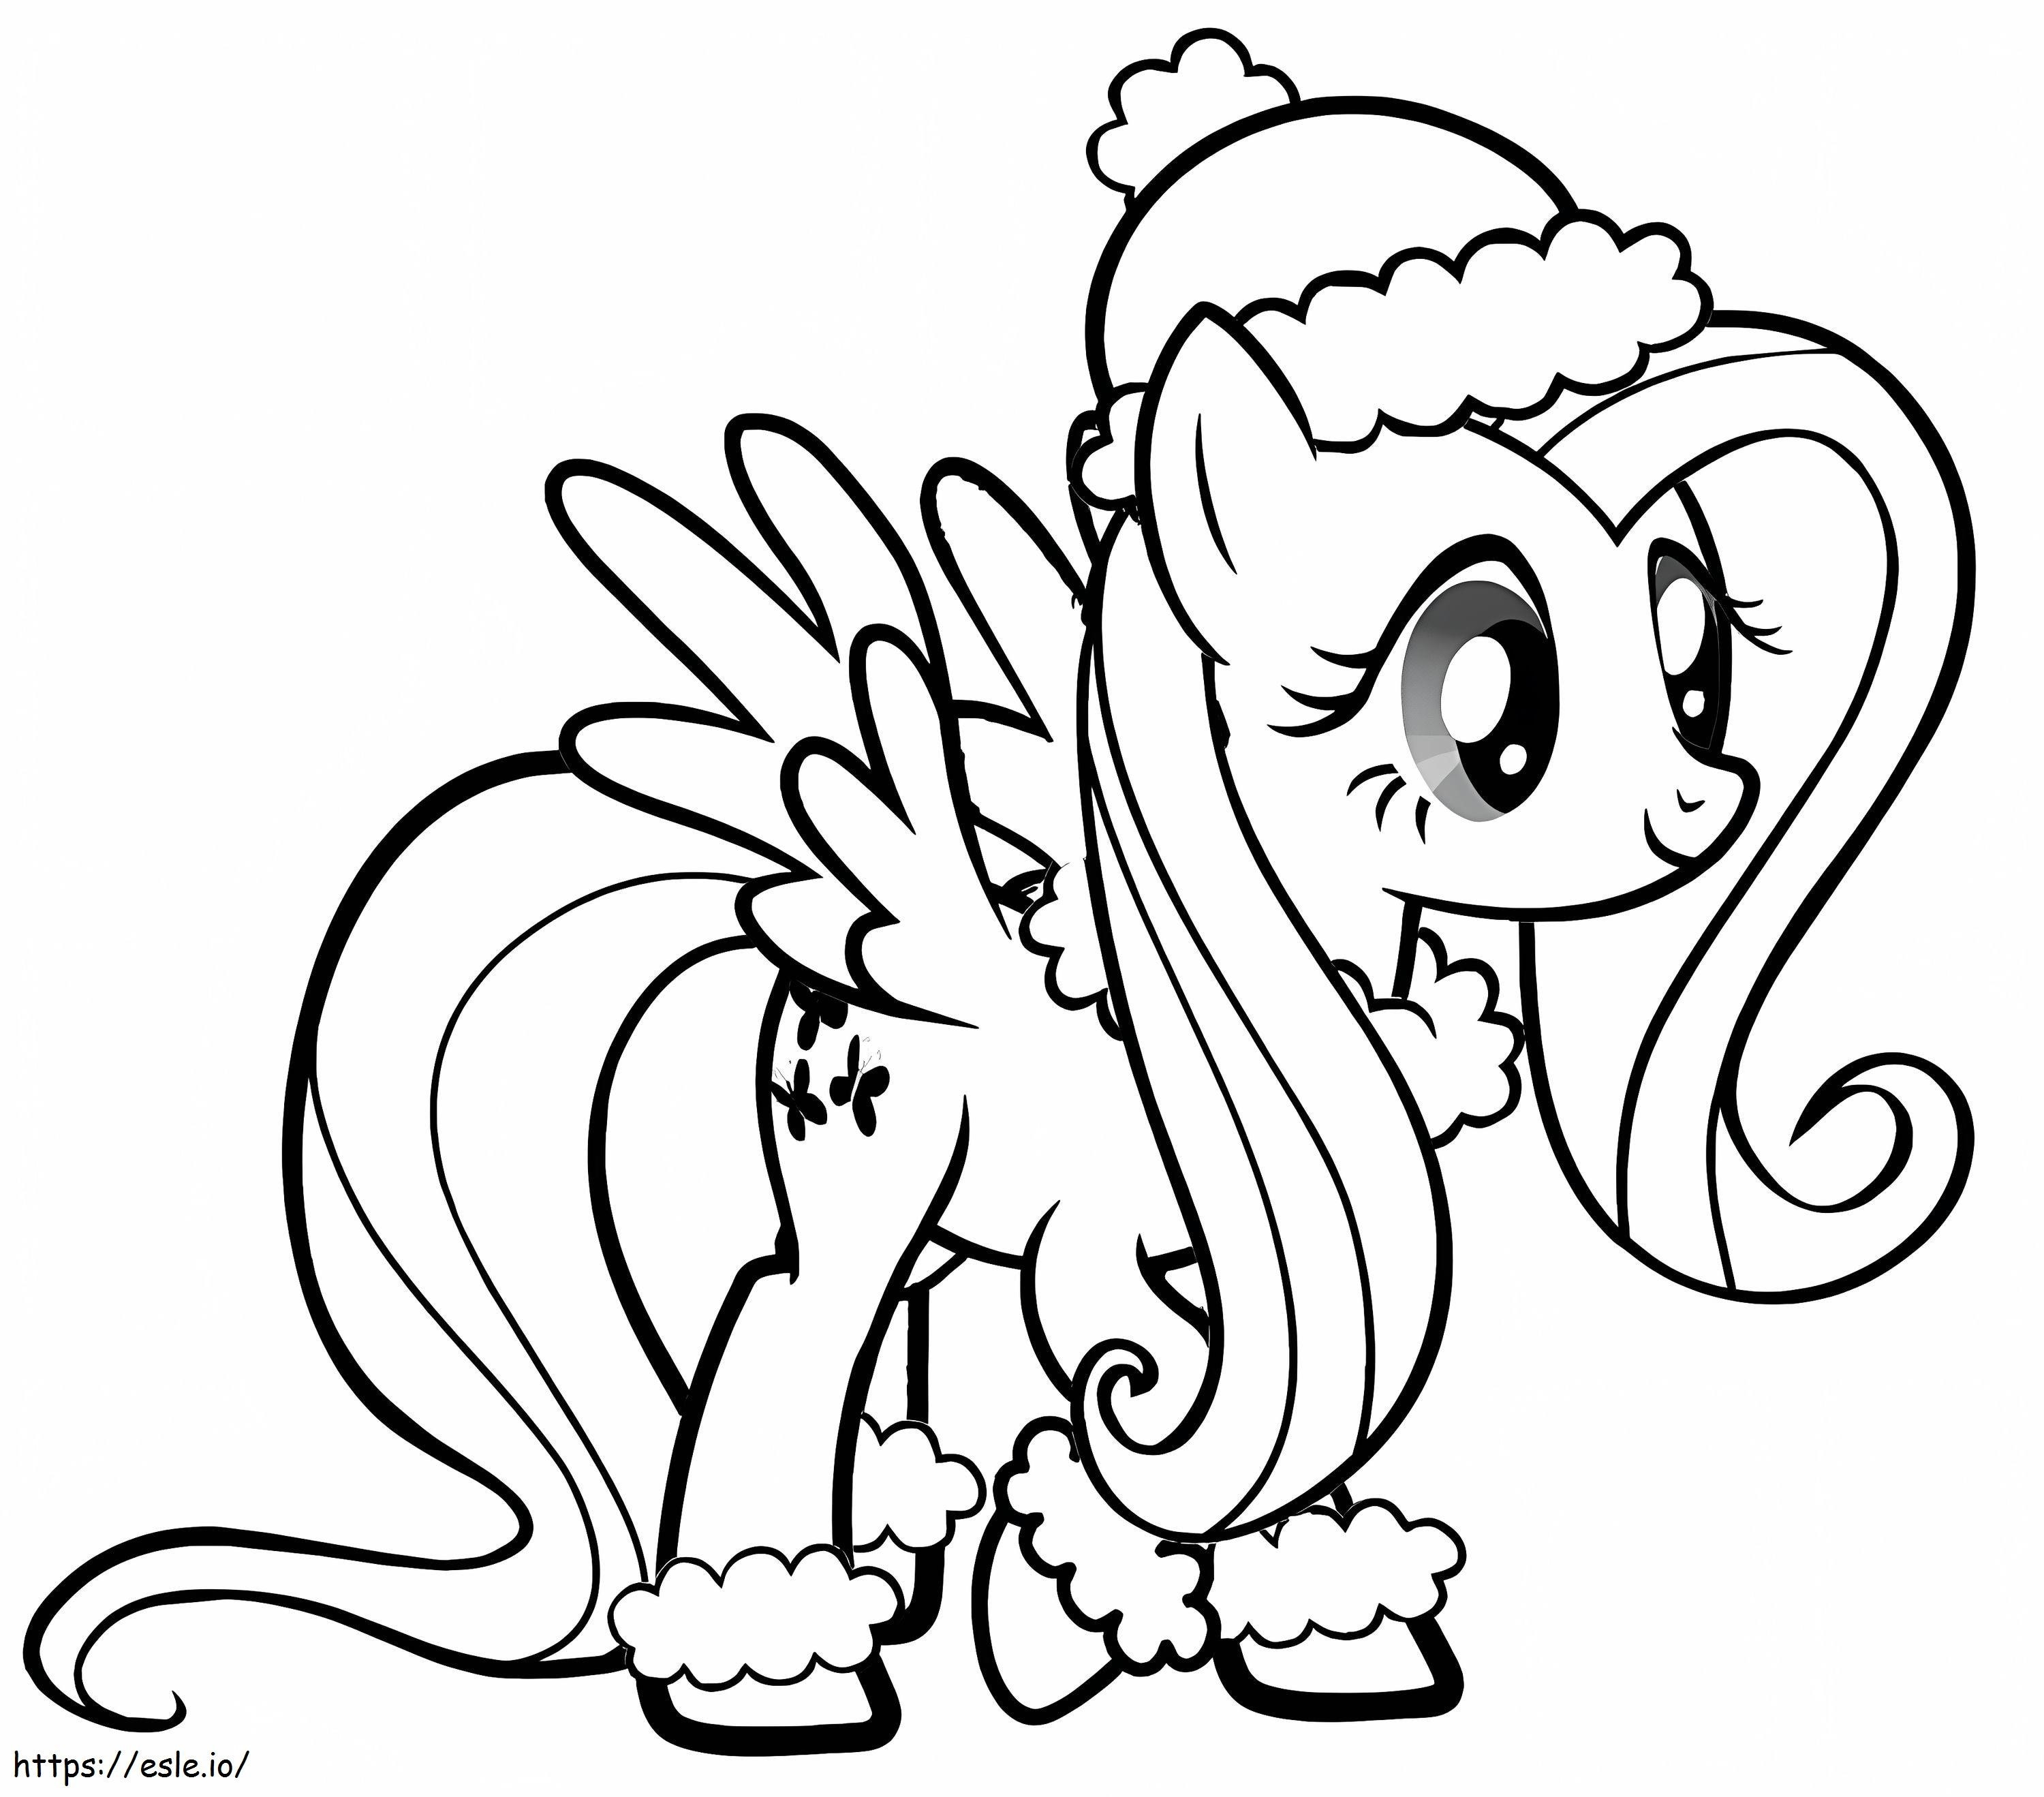 Winter Fluttershy coloring page